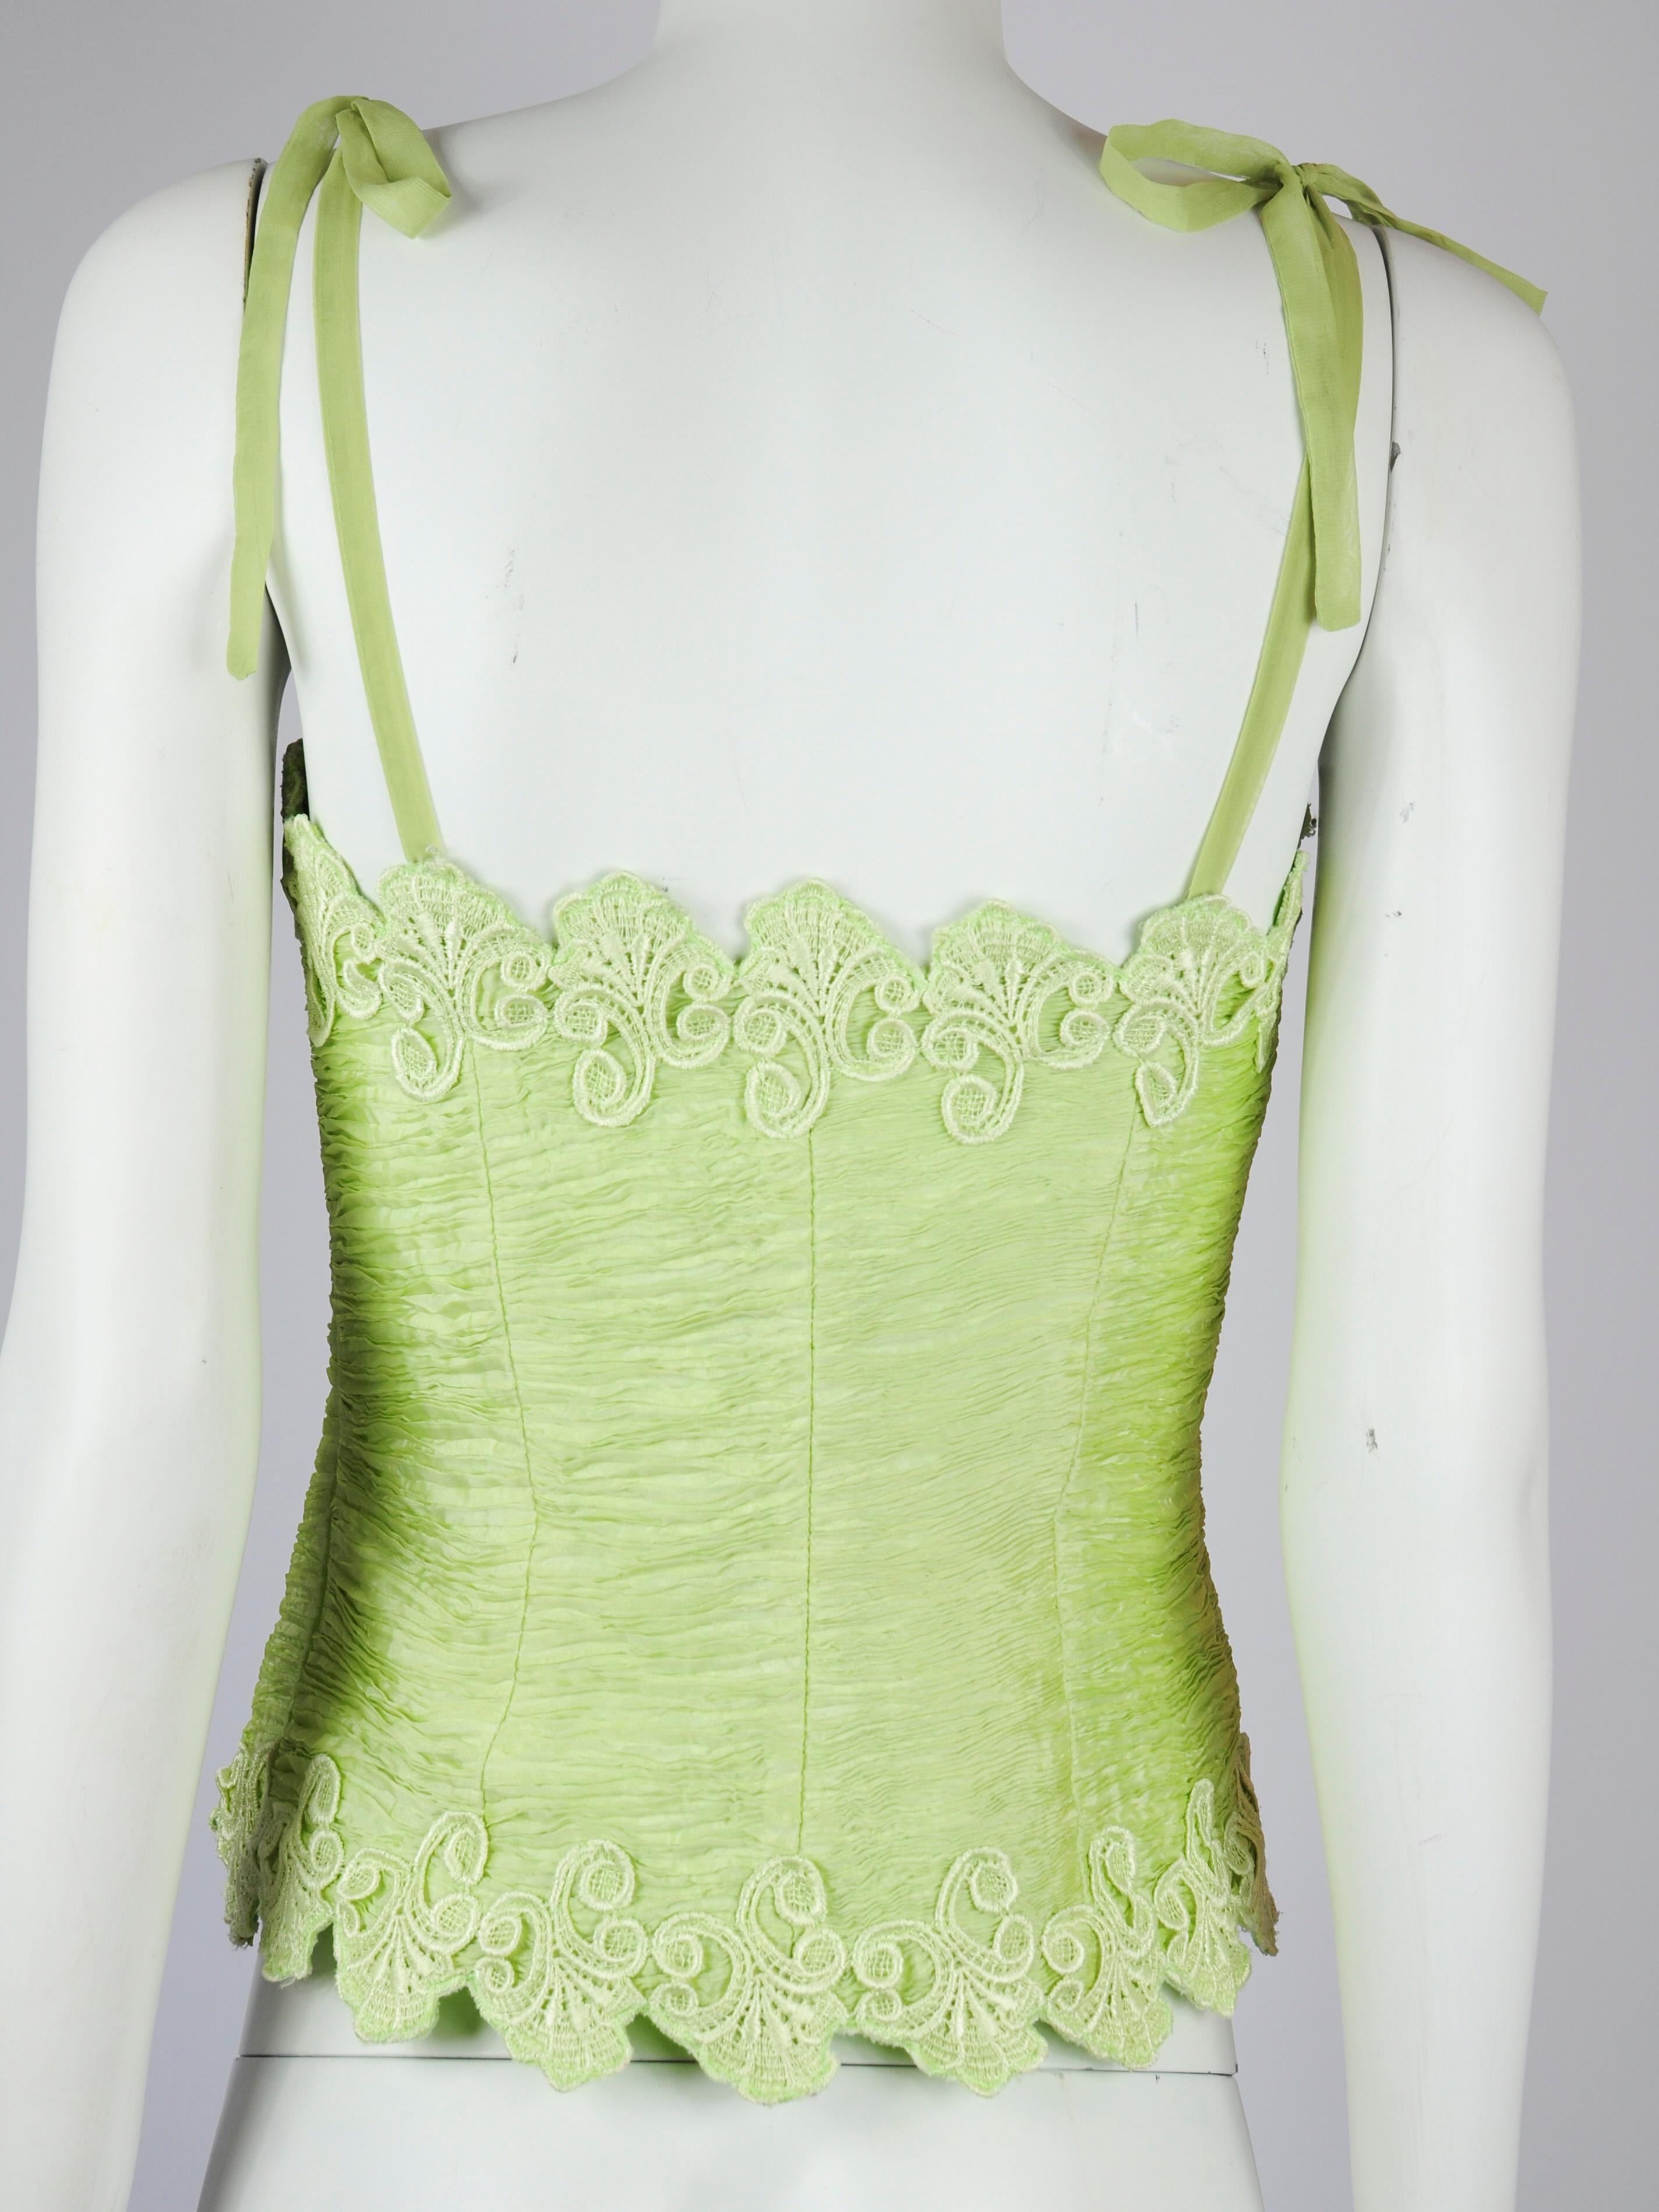 Jiki Monte Carlo Creations Plissé Lace Sleeveless Top with Bow detail 1990s For Sale 2